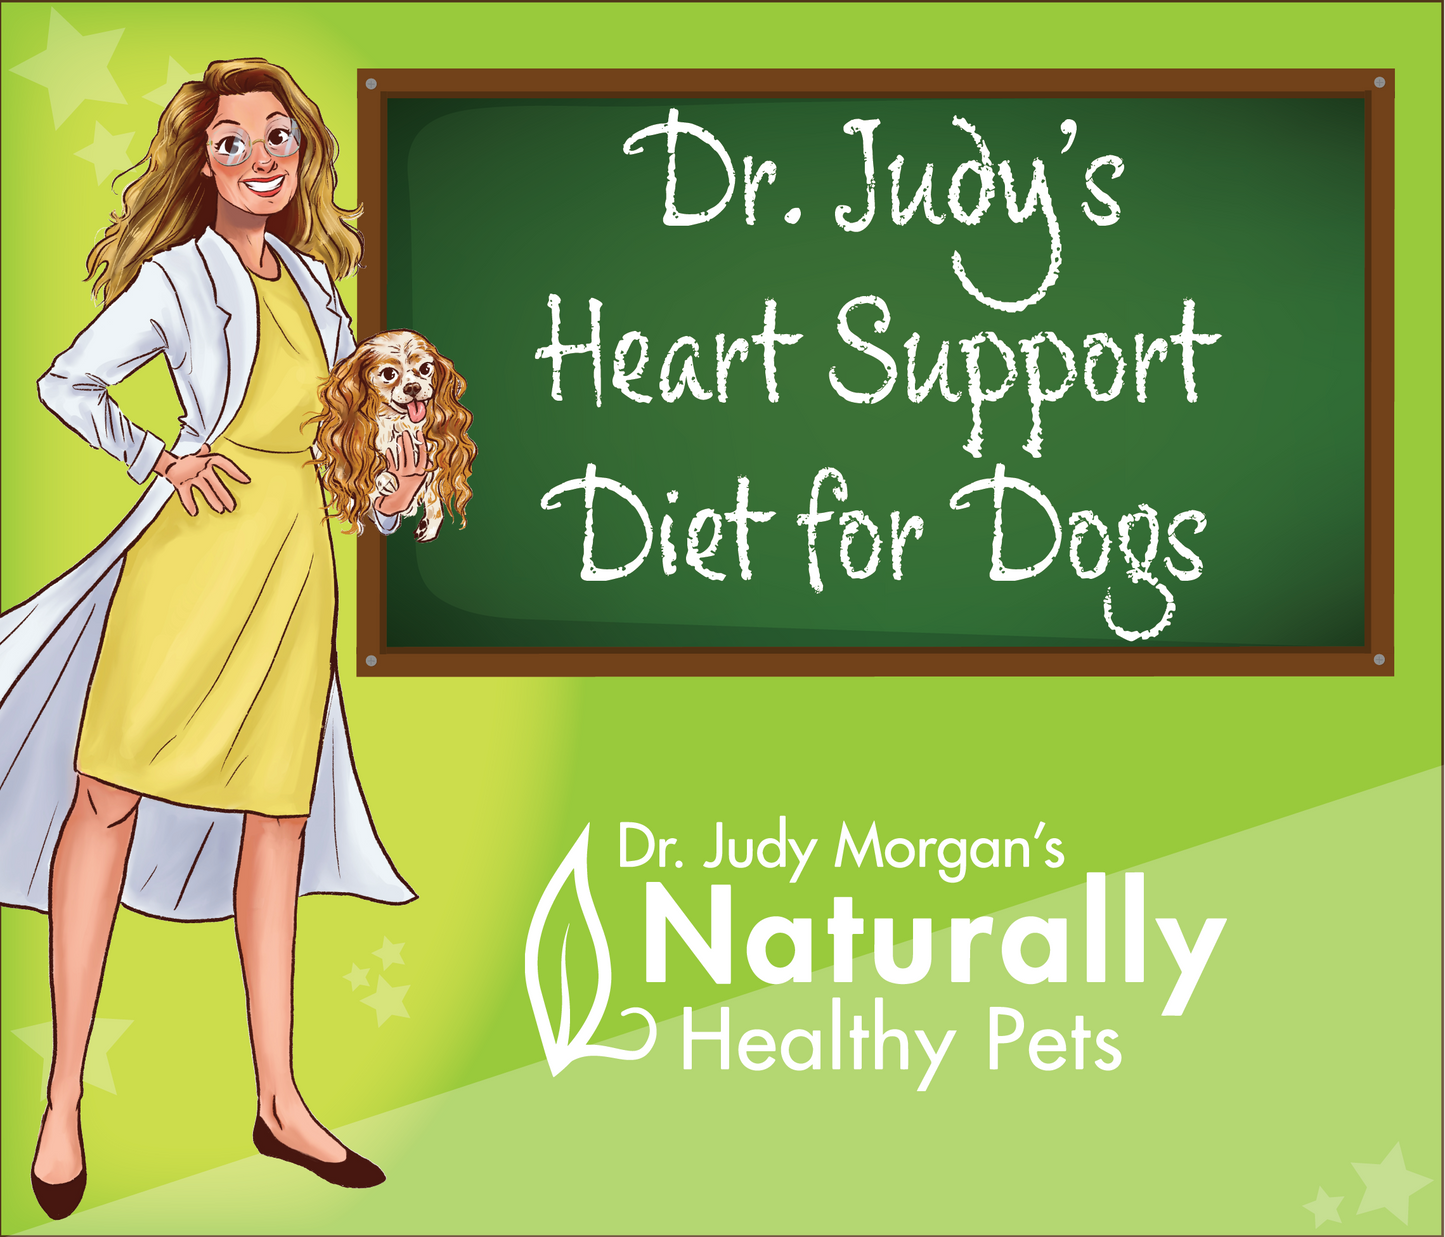 Dr. Judy's Heart Support Diet for Dogs